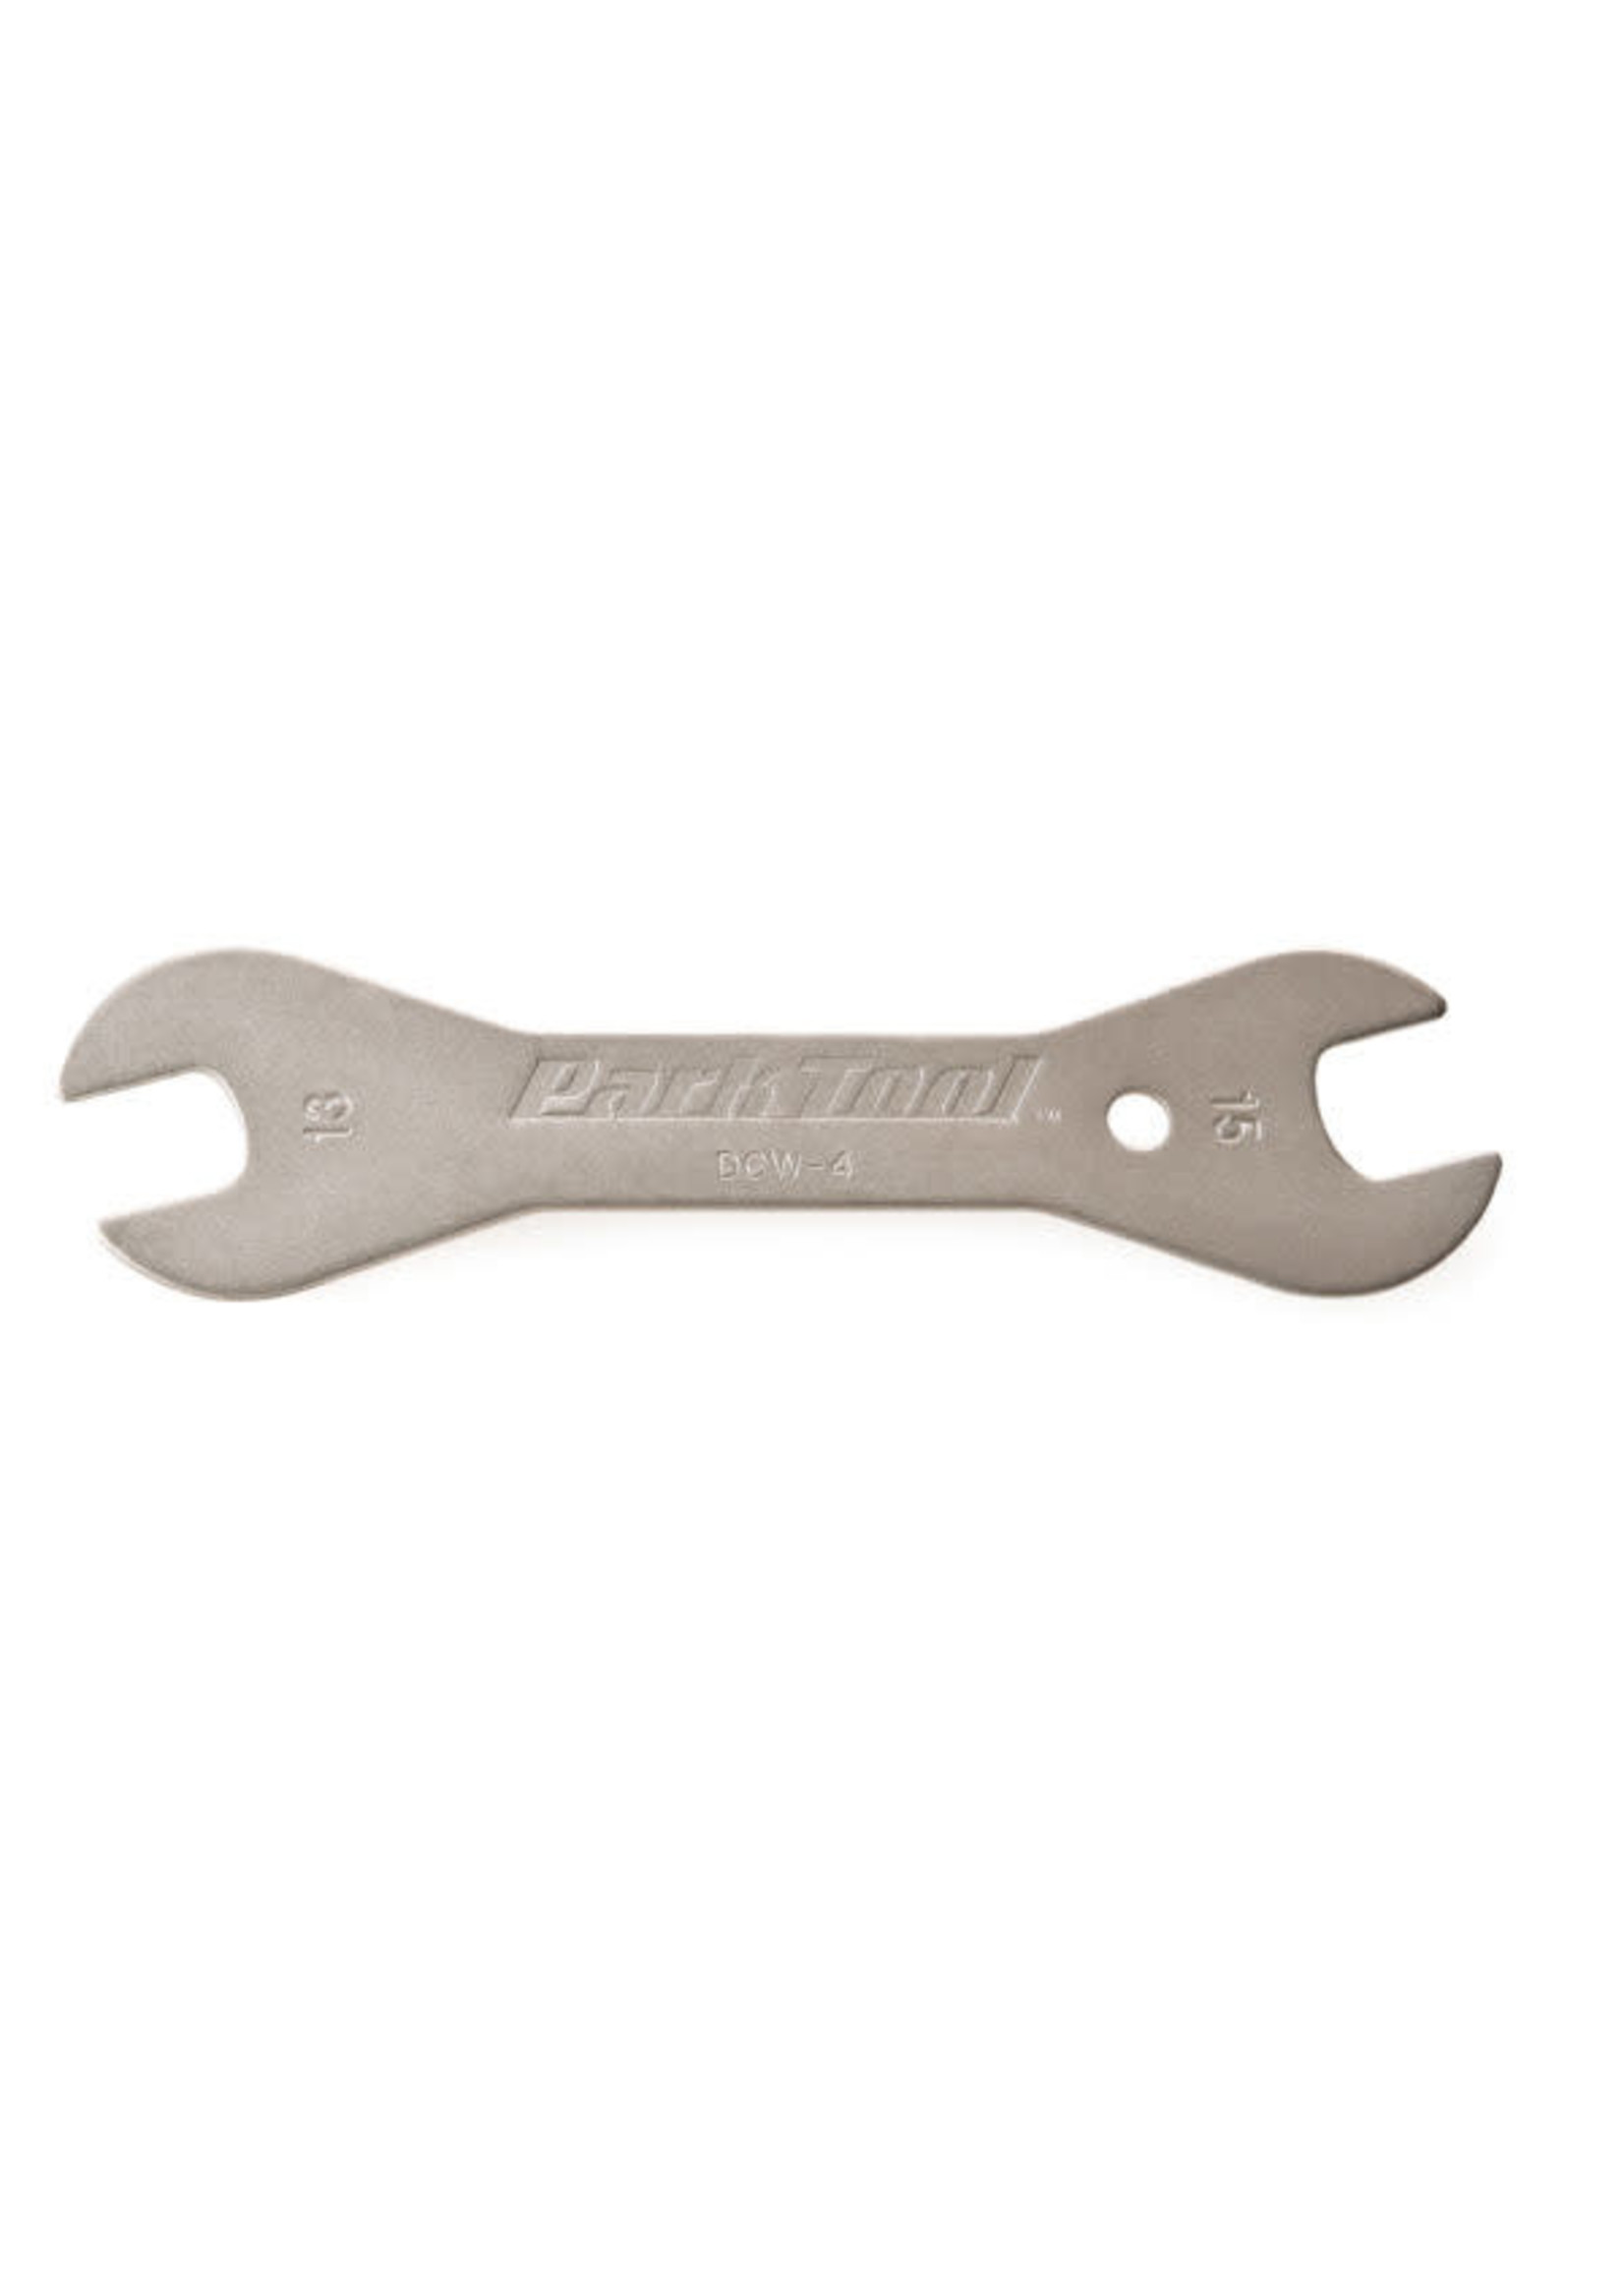 Park Tool TOOL HUB CONE WRENCH DCW4-PARK 13-15 DBL